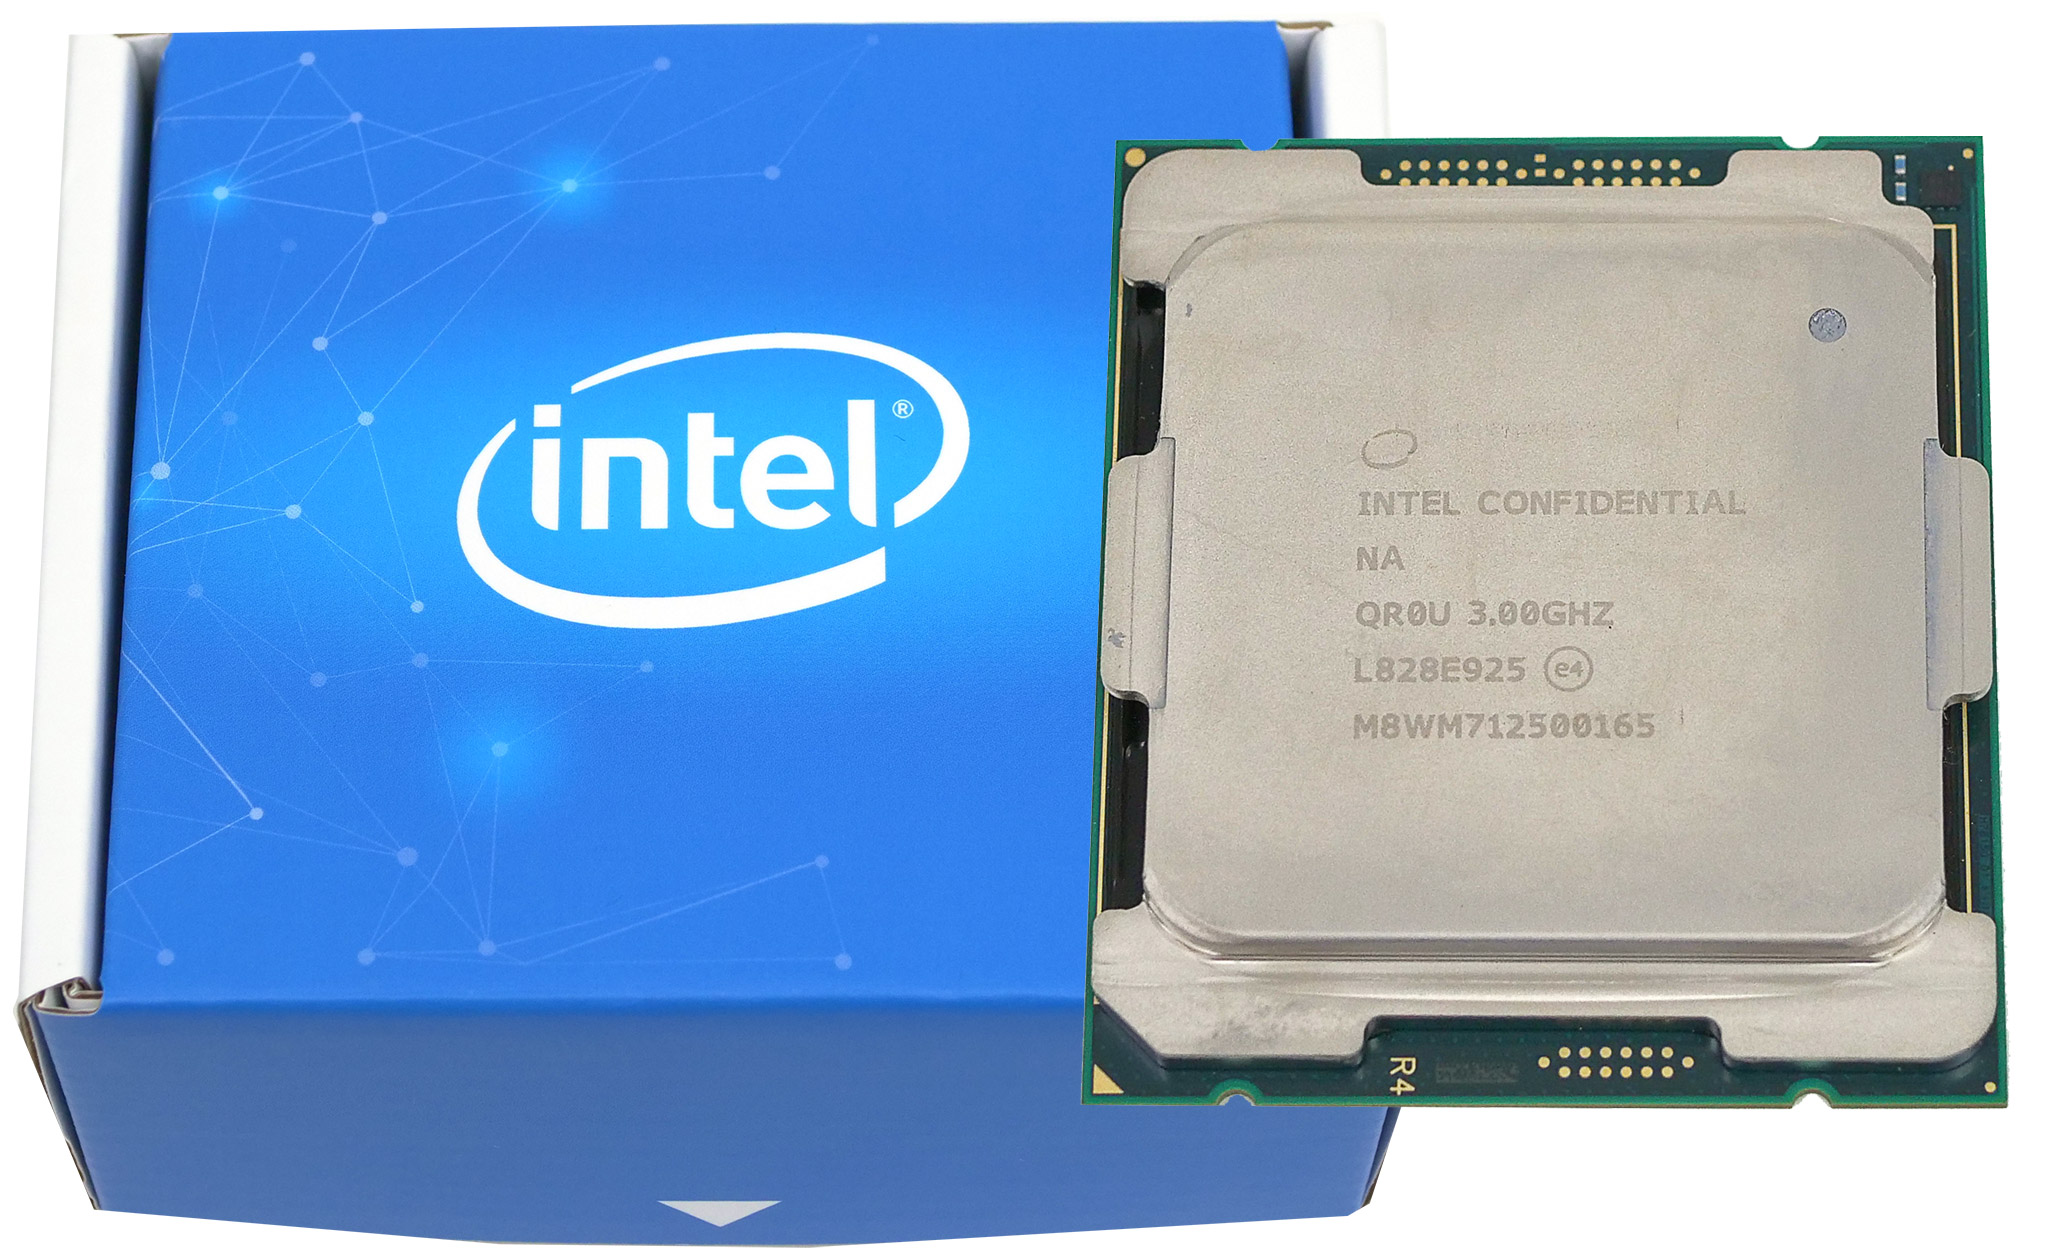 Intel Core i9-7980XE CPU Extreme Edition Processor 24.75M Cache up to 4.20  GHz